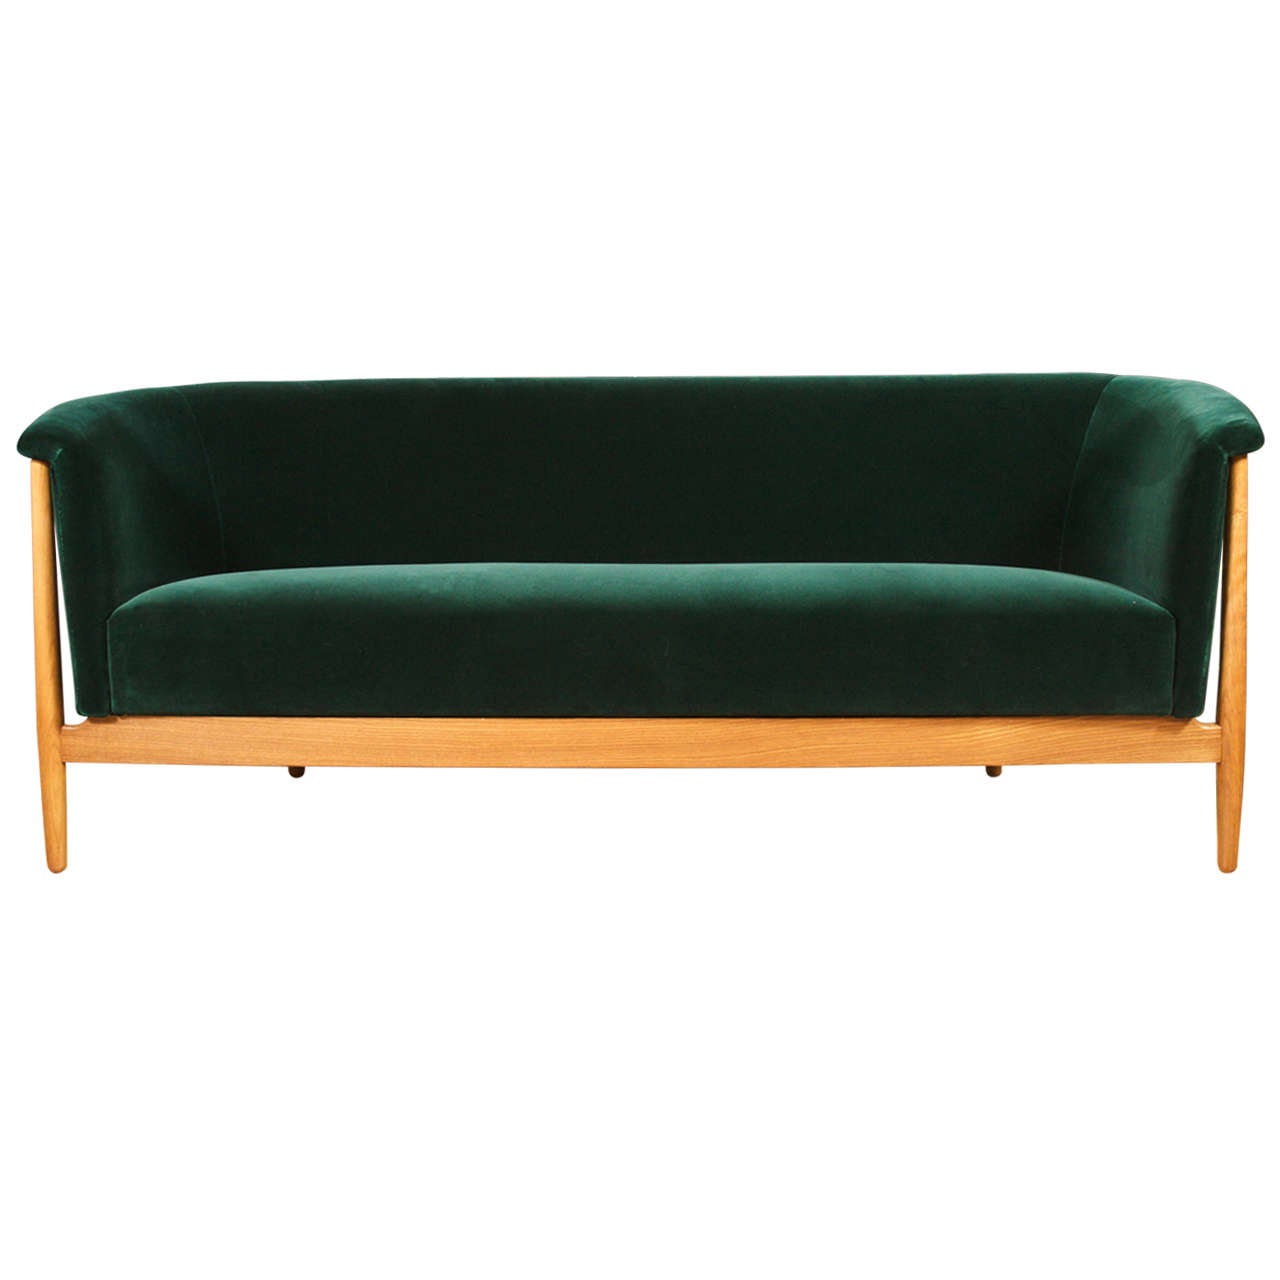 An rare and elegant sofa with rounded corners in oak with a rich natural patina.  Restored in a luxurious emerald green velvet from Holland & Sherry.  A pair of sofa's are available.
Denmark, c.1952